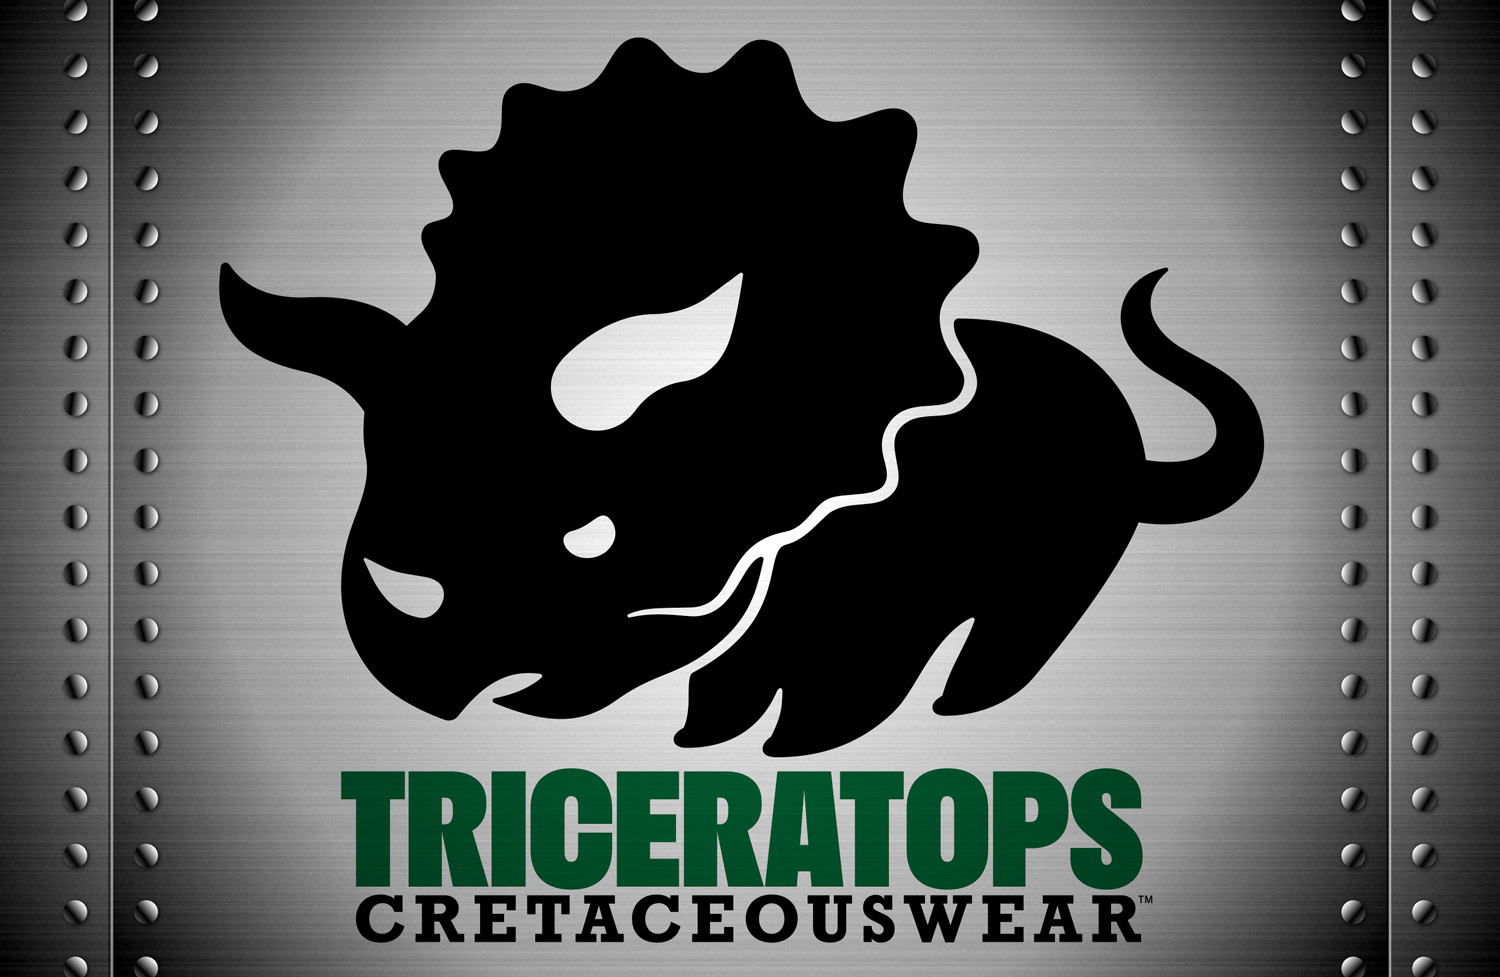 A triceratops logo on a brushed metal bacground with appropriately lit rivets